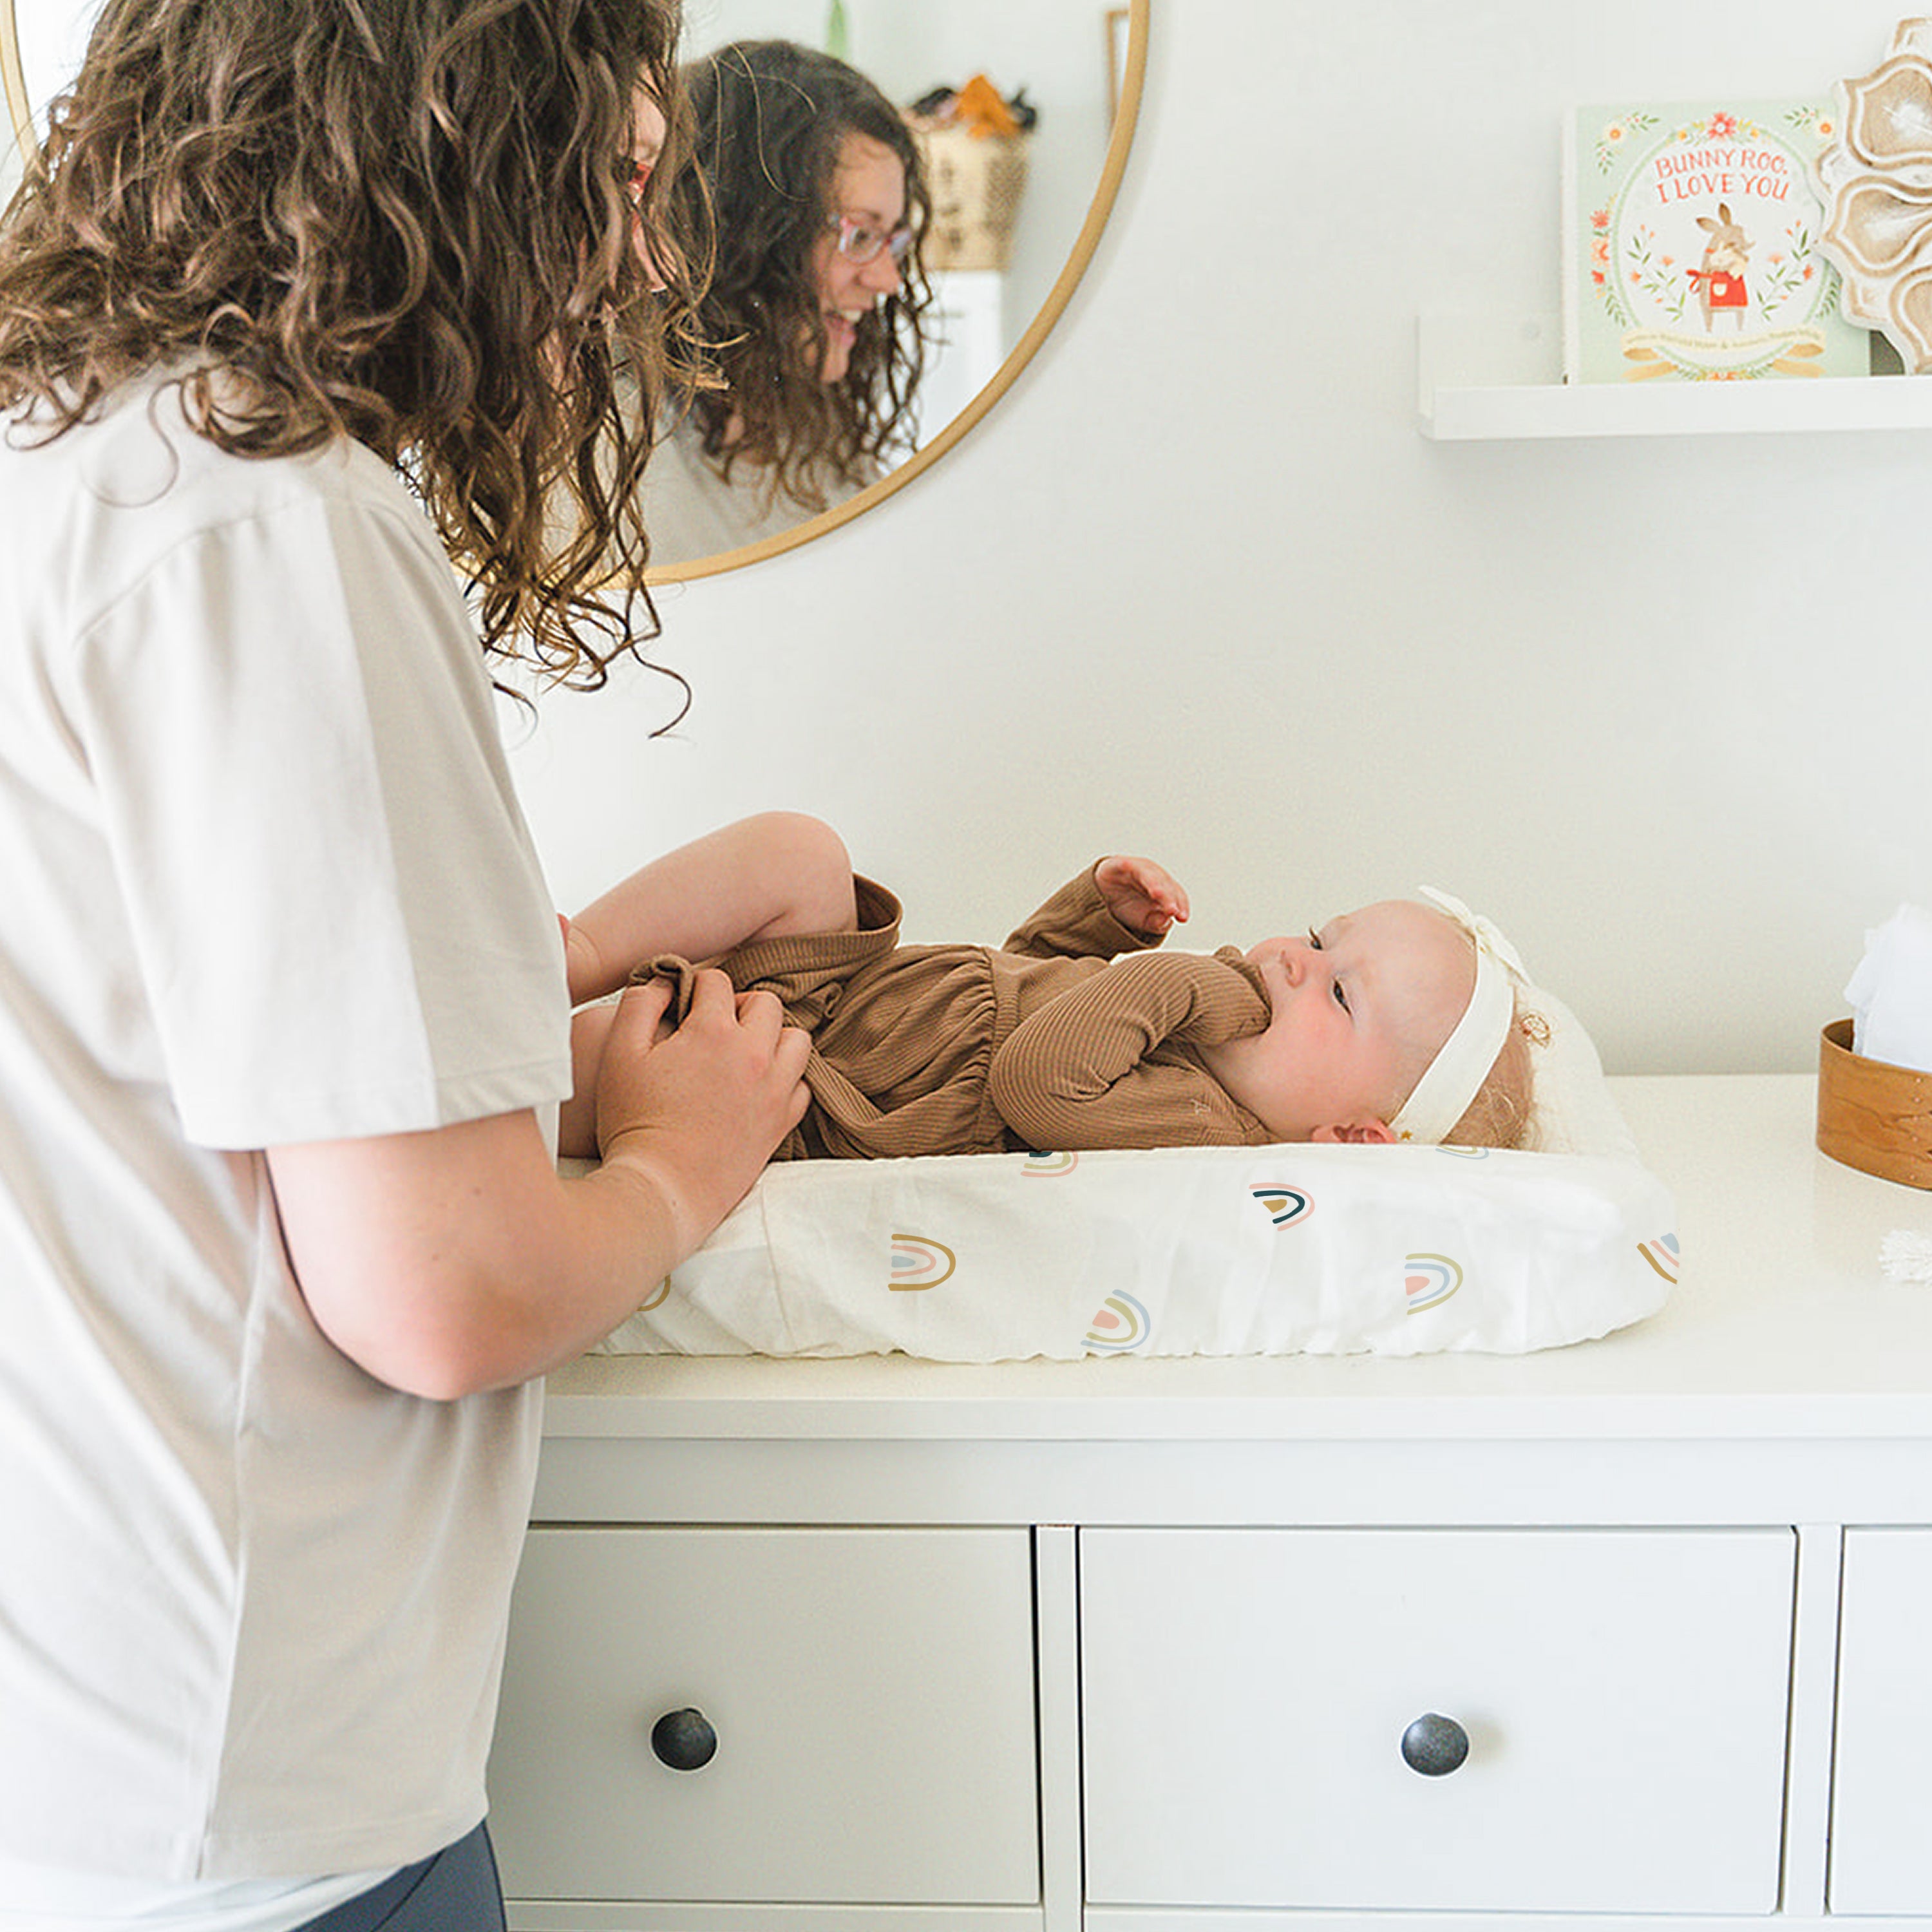 A woman with curly hair, in a white t-shirt, gently interacts with a baby lying on a changing table in a bright, well-organized nursery featuring the Makemake Organics Organic Cotton Changing Pad Cover - Rainbow.